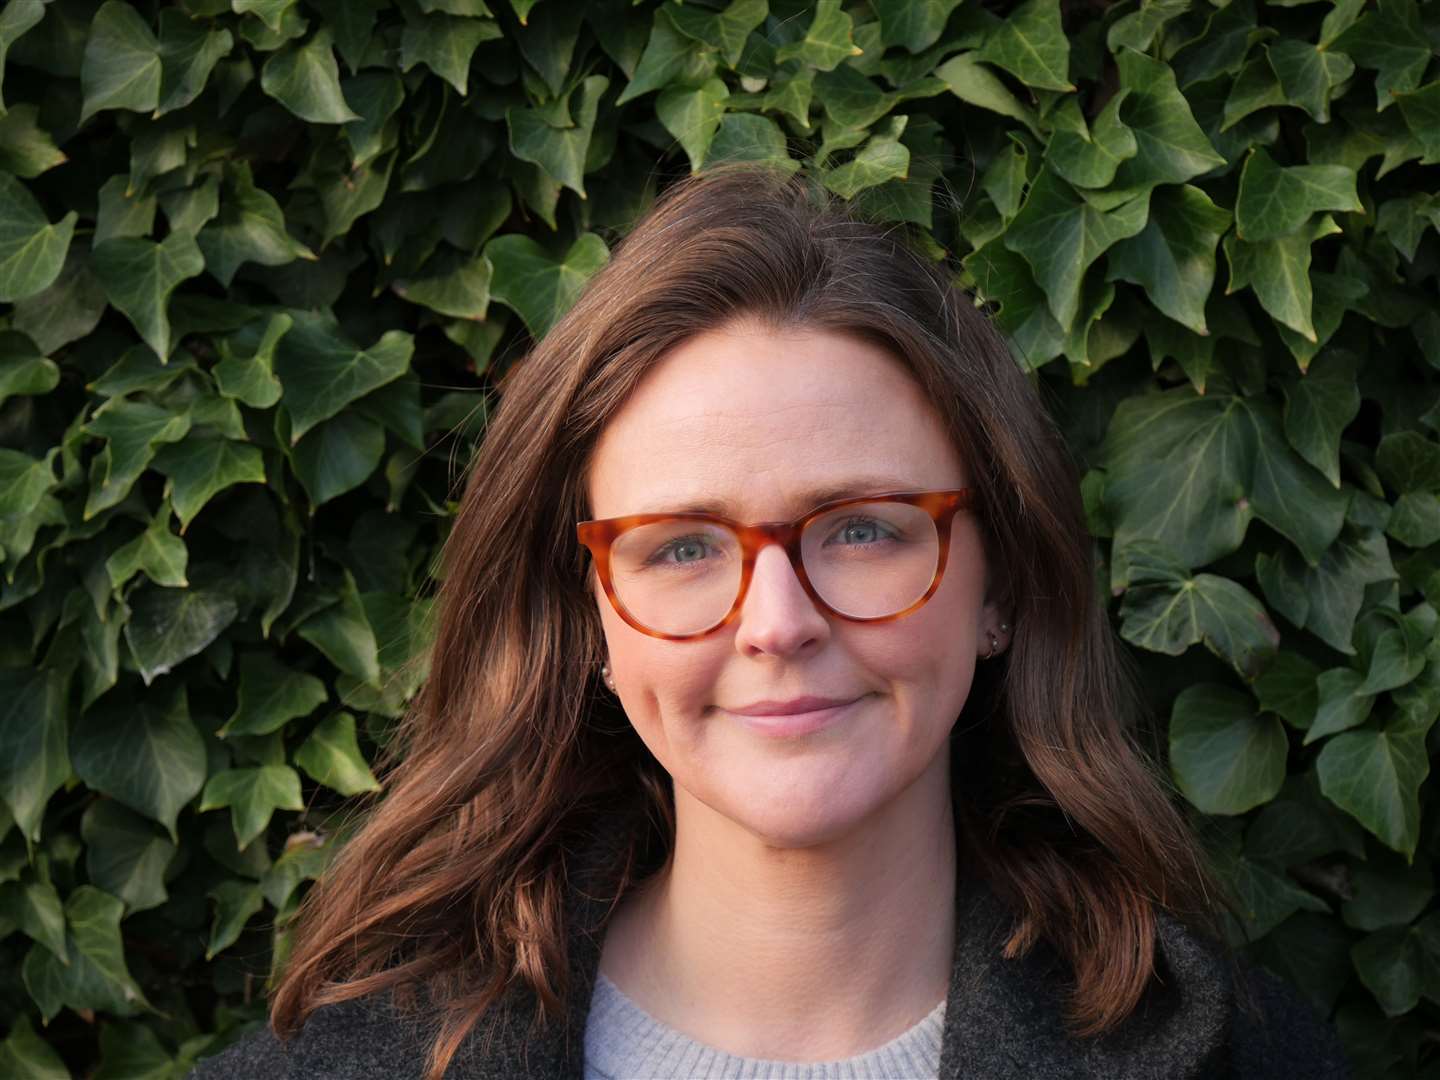 Lauren Edwards now represents Rochester East on Medway Council